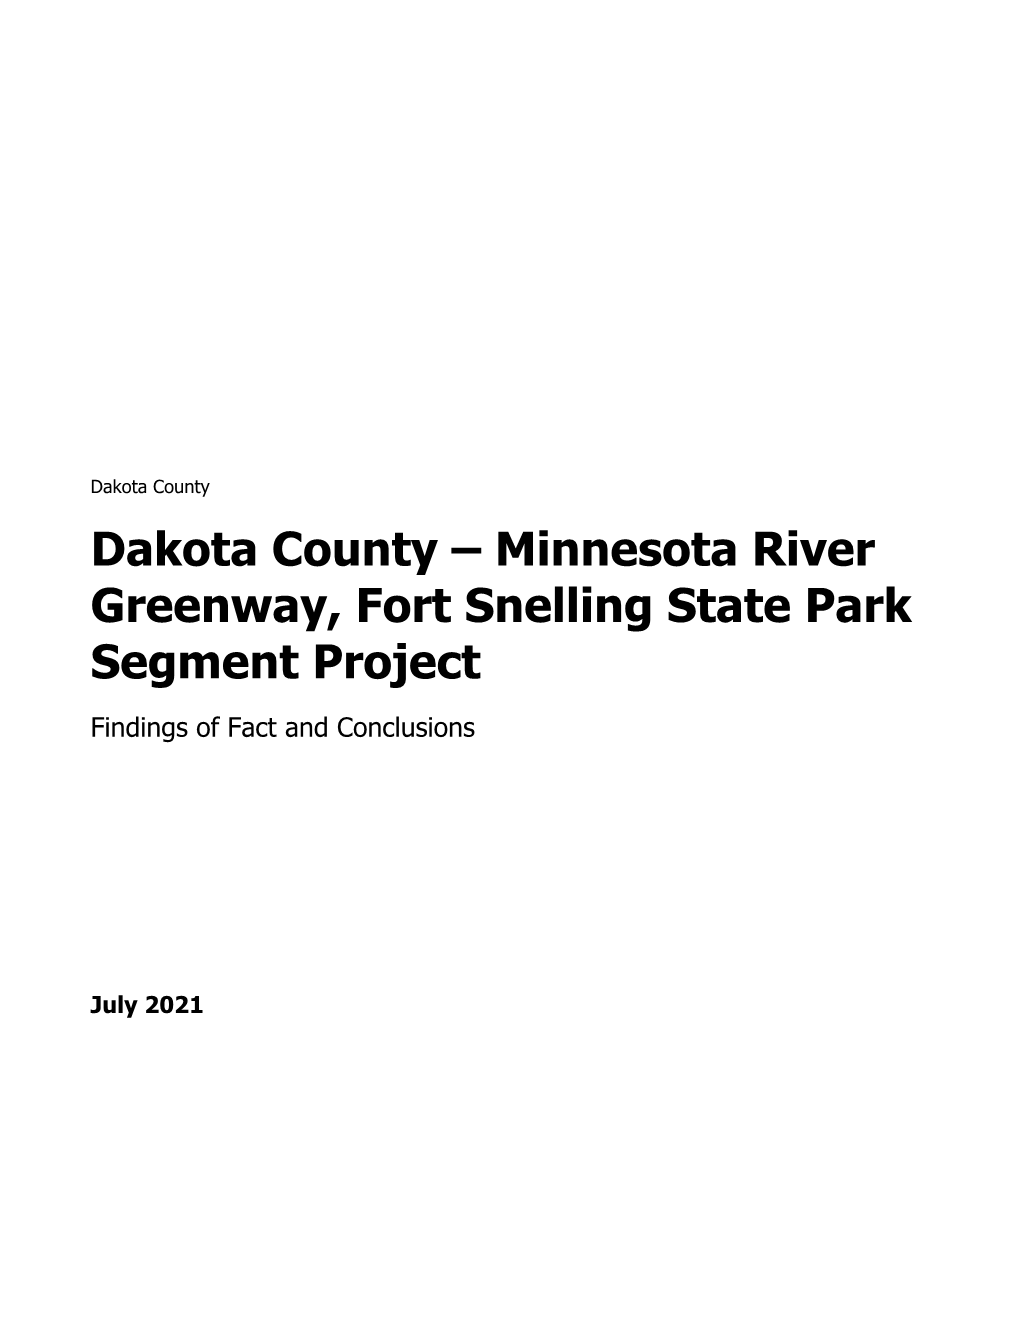 Minnesota River Greenway, Fort Snelling State Park Segment Project